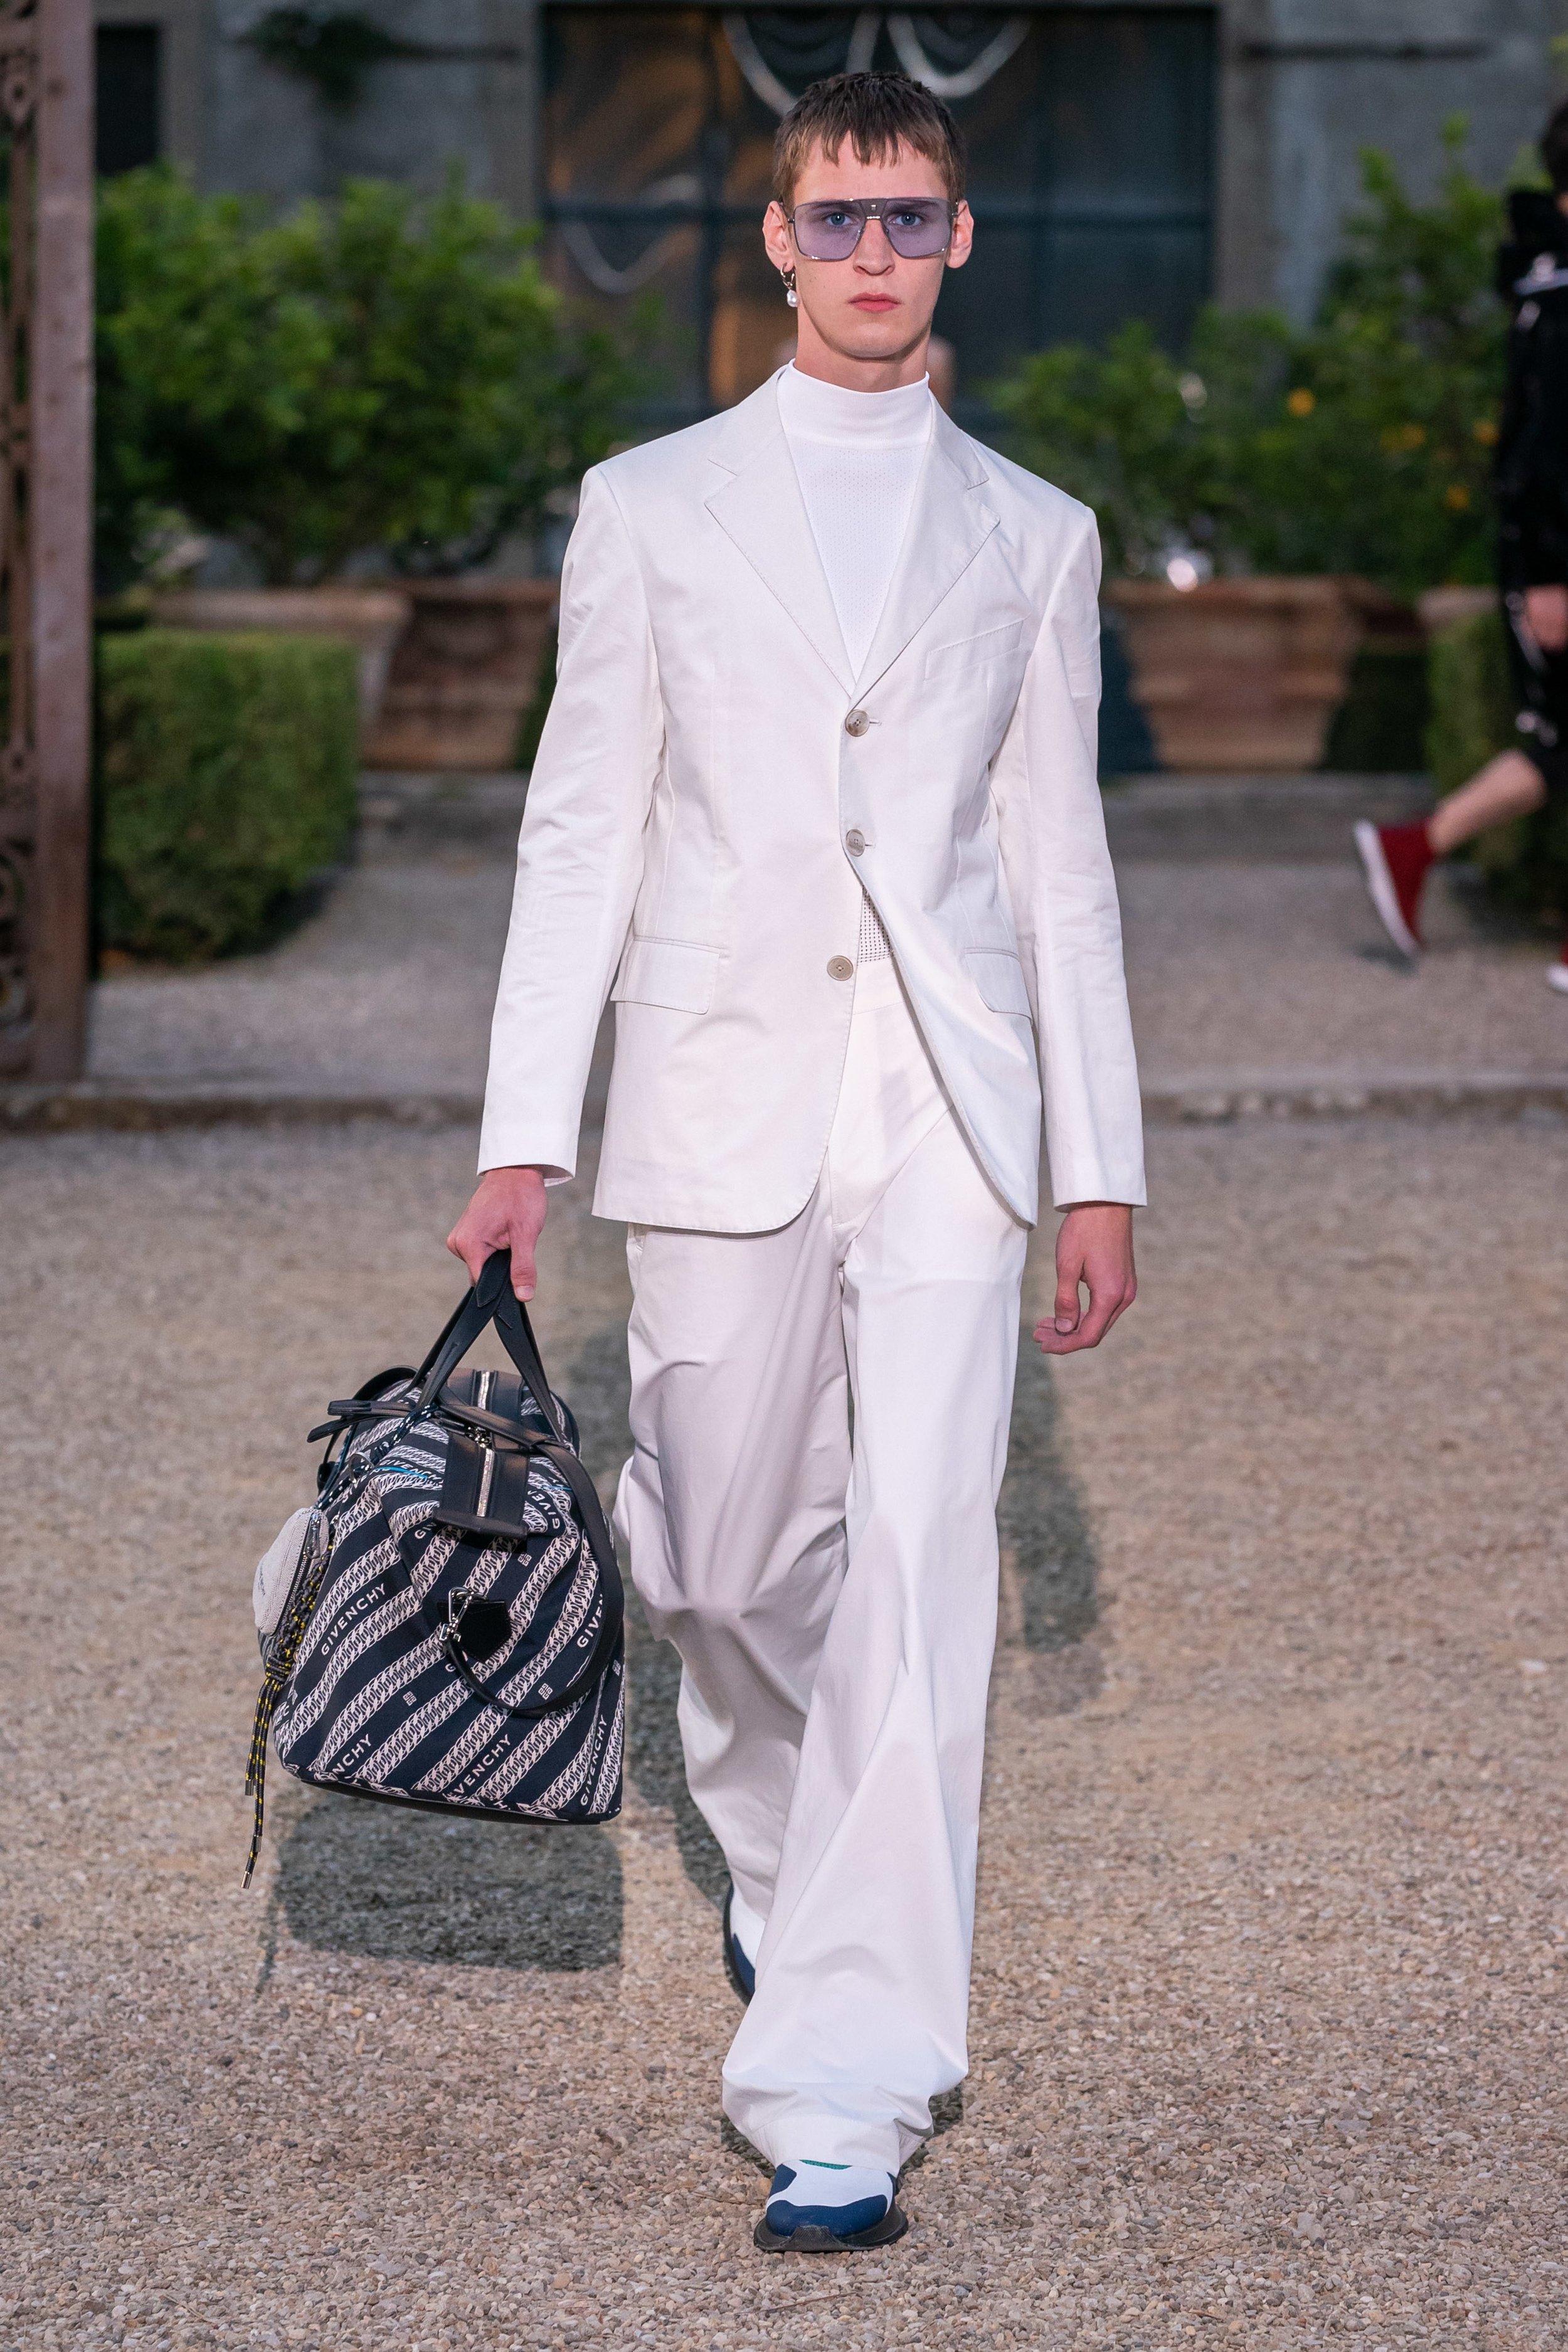 Behind_The_Blinds_Magazine_Givenchy_Men_SS20_Pitti_ALE0222.jpg